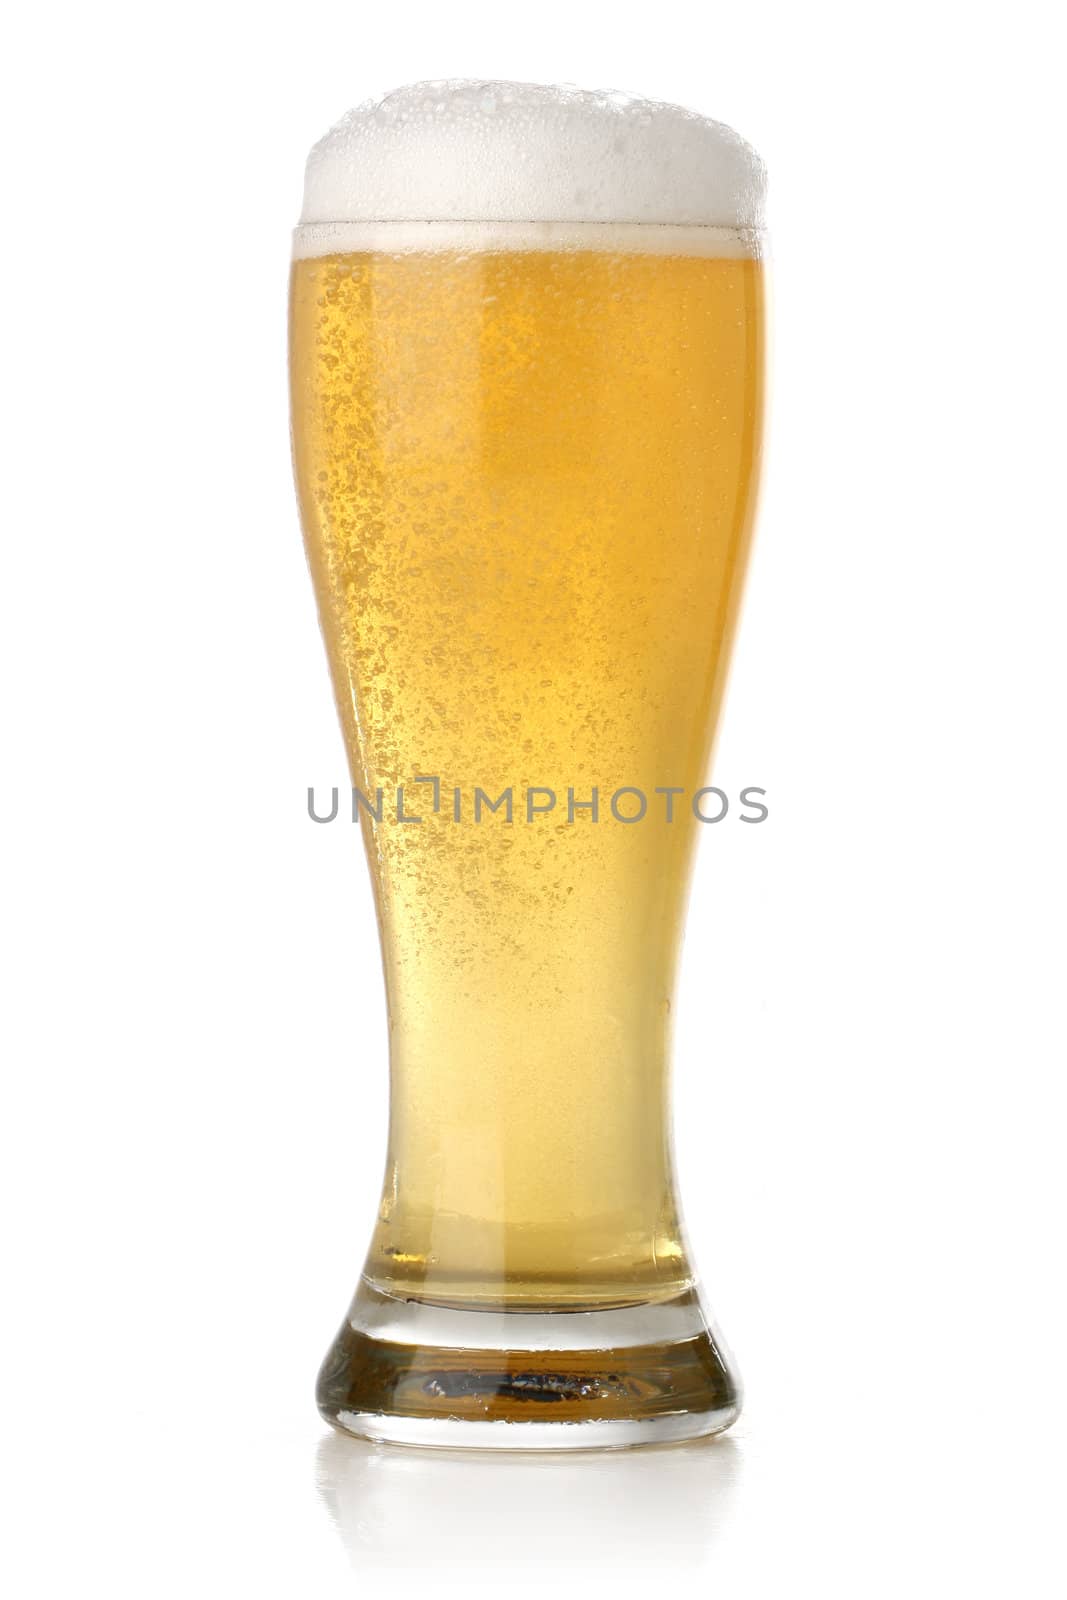 Cold beer glass by Erdosain